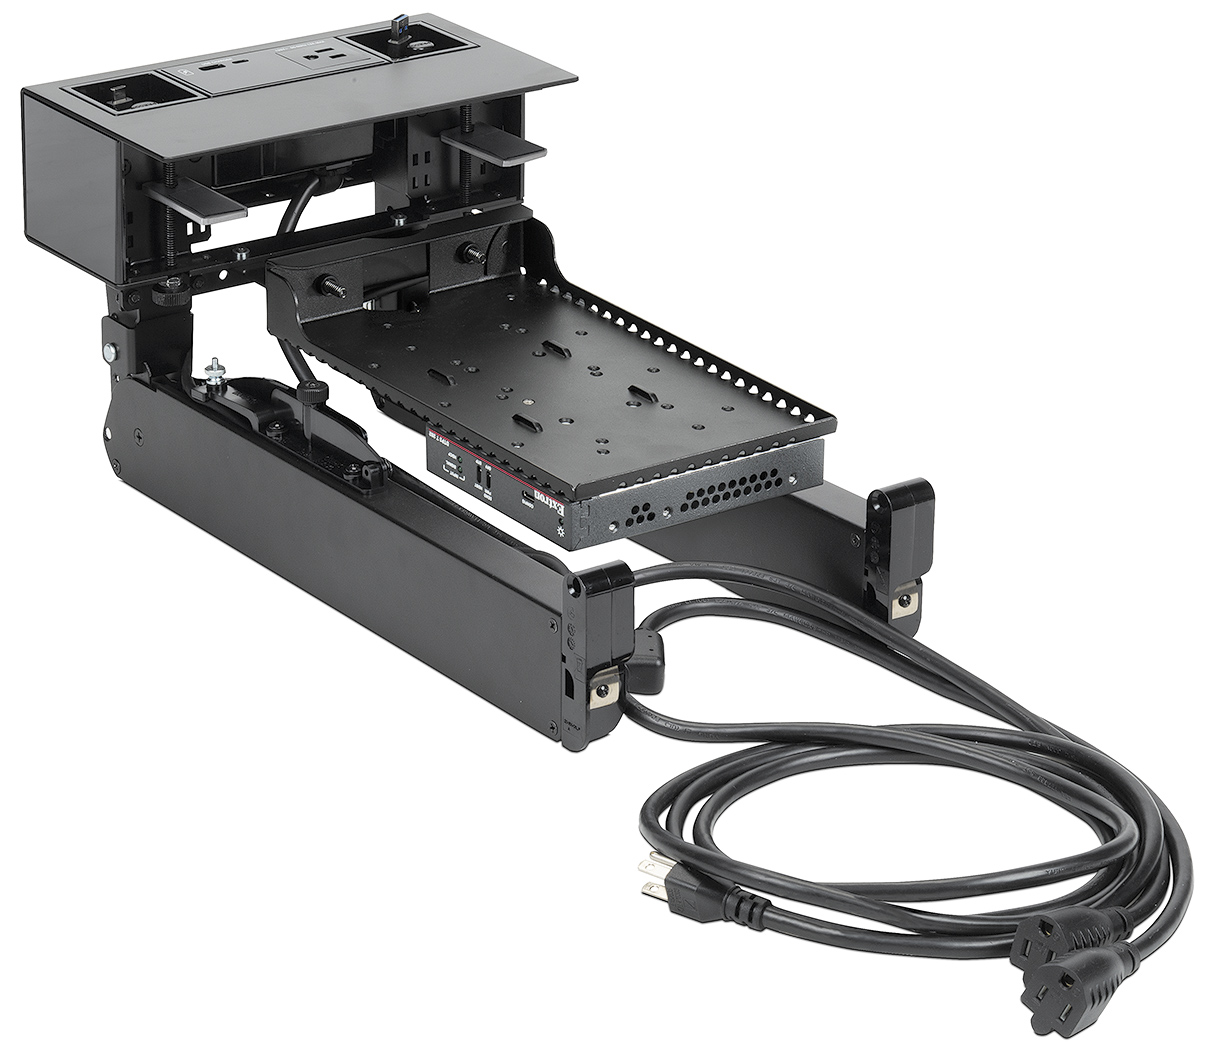 Cable Cubby F55 Edge is compatible with PMK 155 Mounting Kit to install power supplies and other devices beneath the table; items sold separately